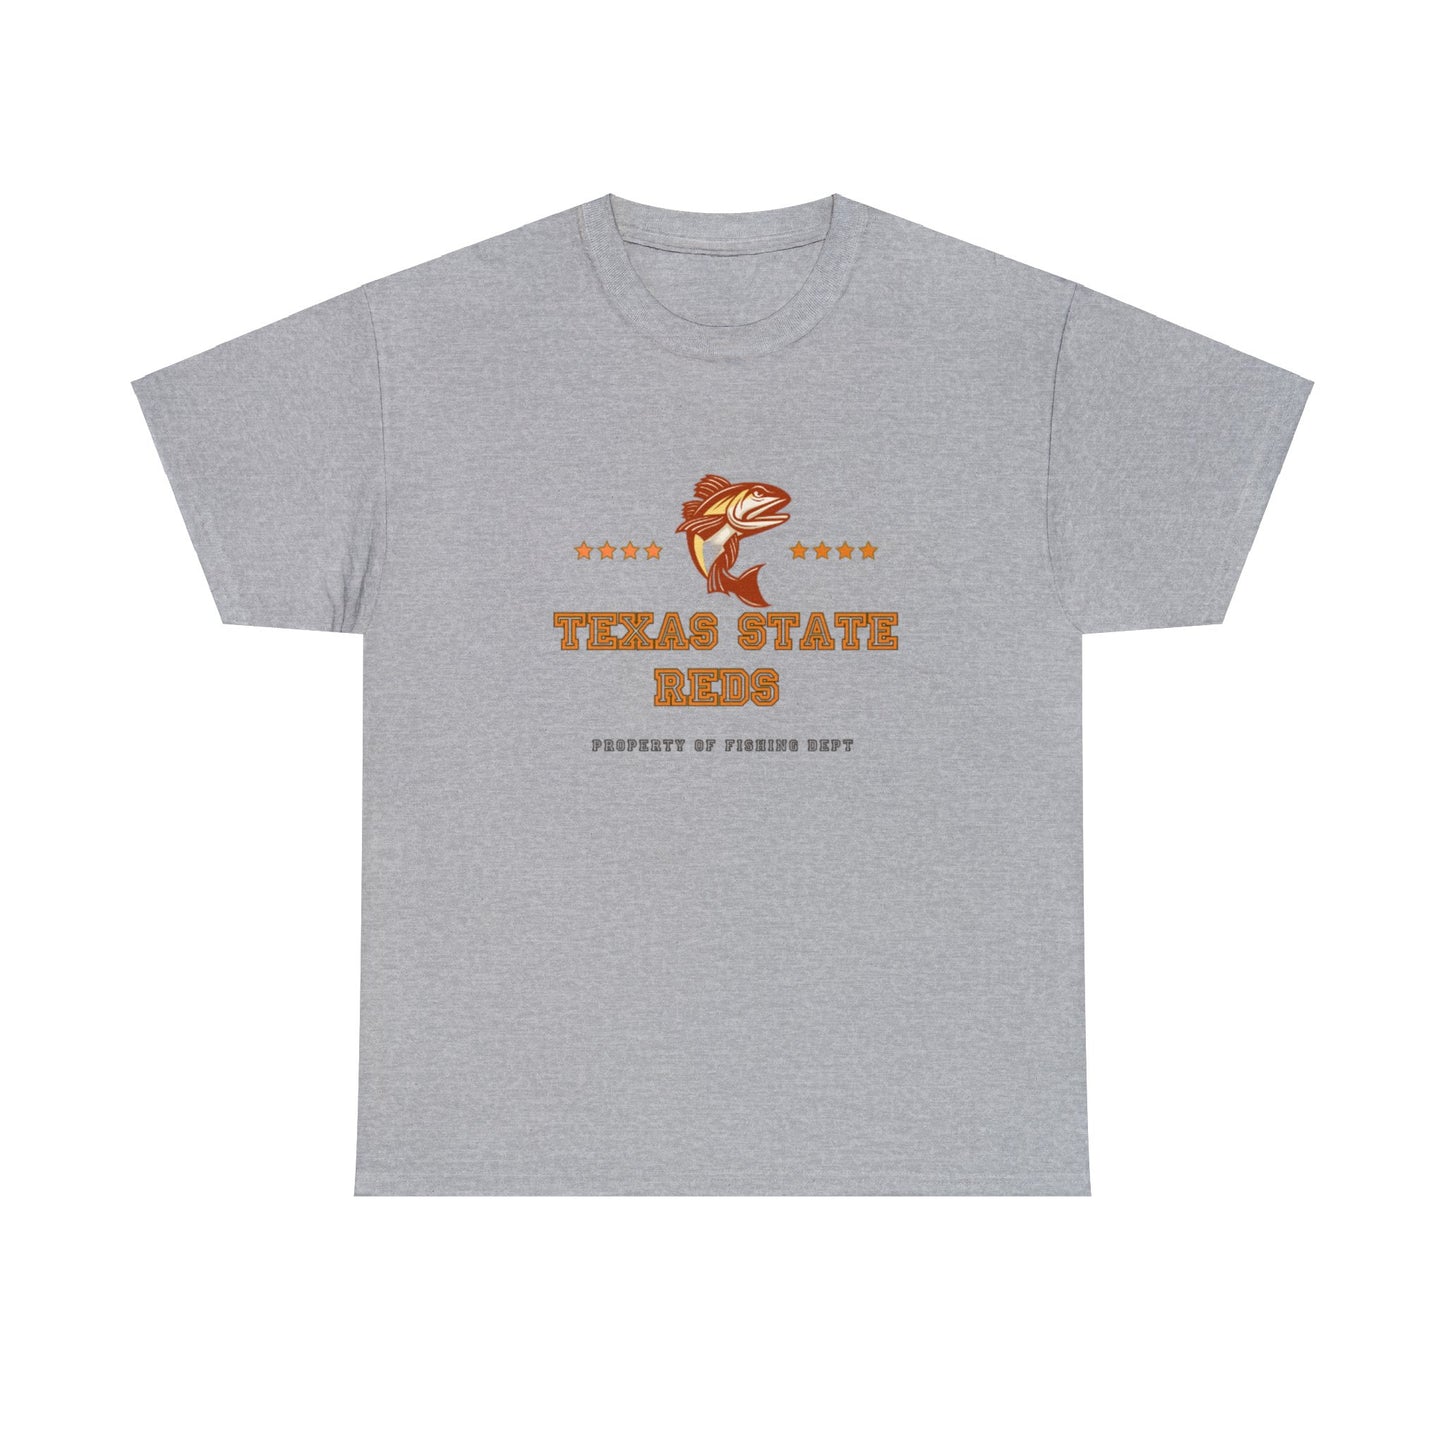 Texas State Reds Property Tee